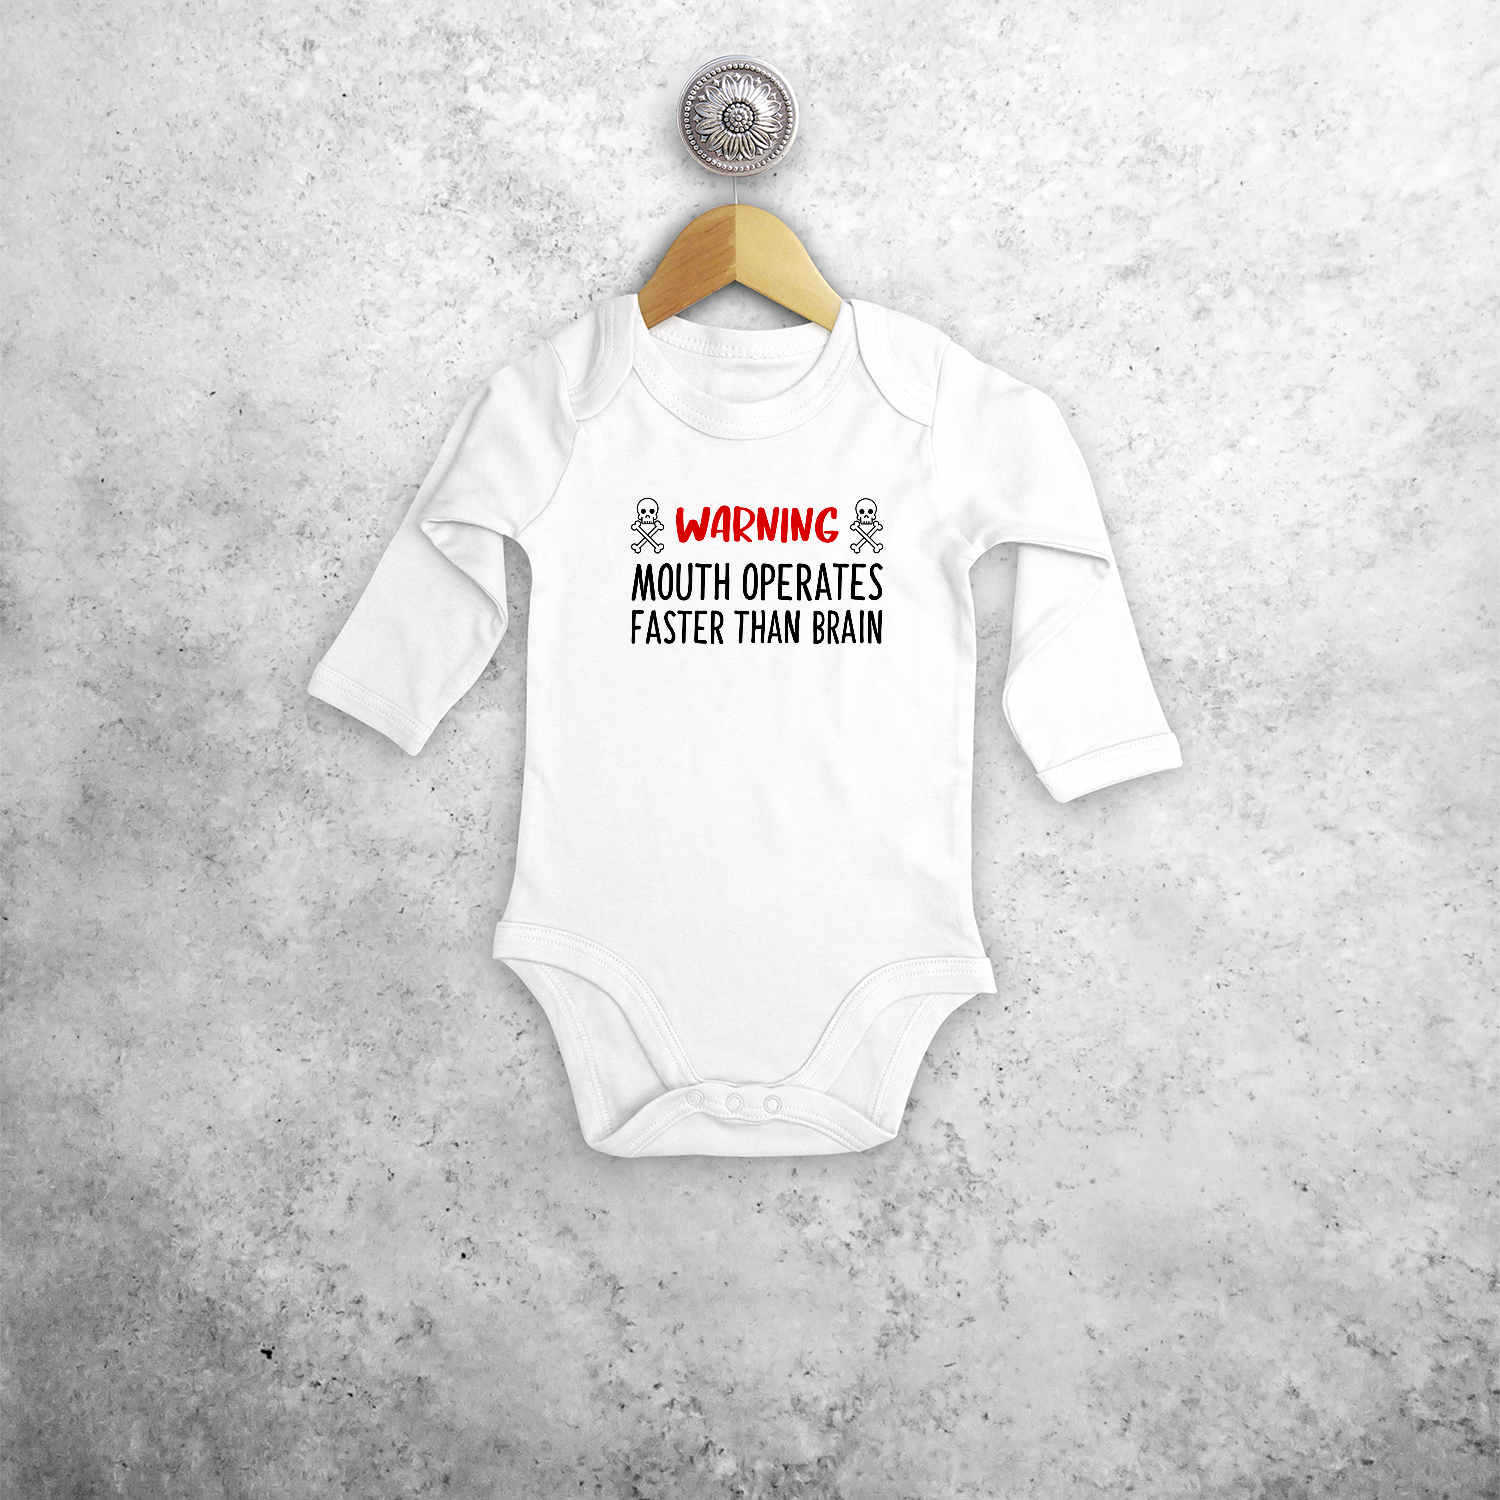 'Warning: mouth operates faster than mouth' baby longsleeve bodysuit